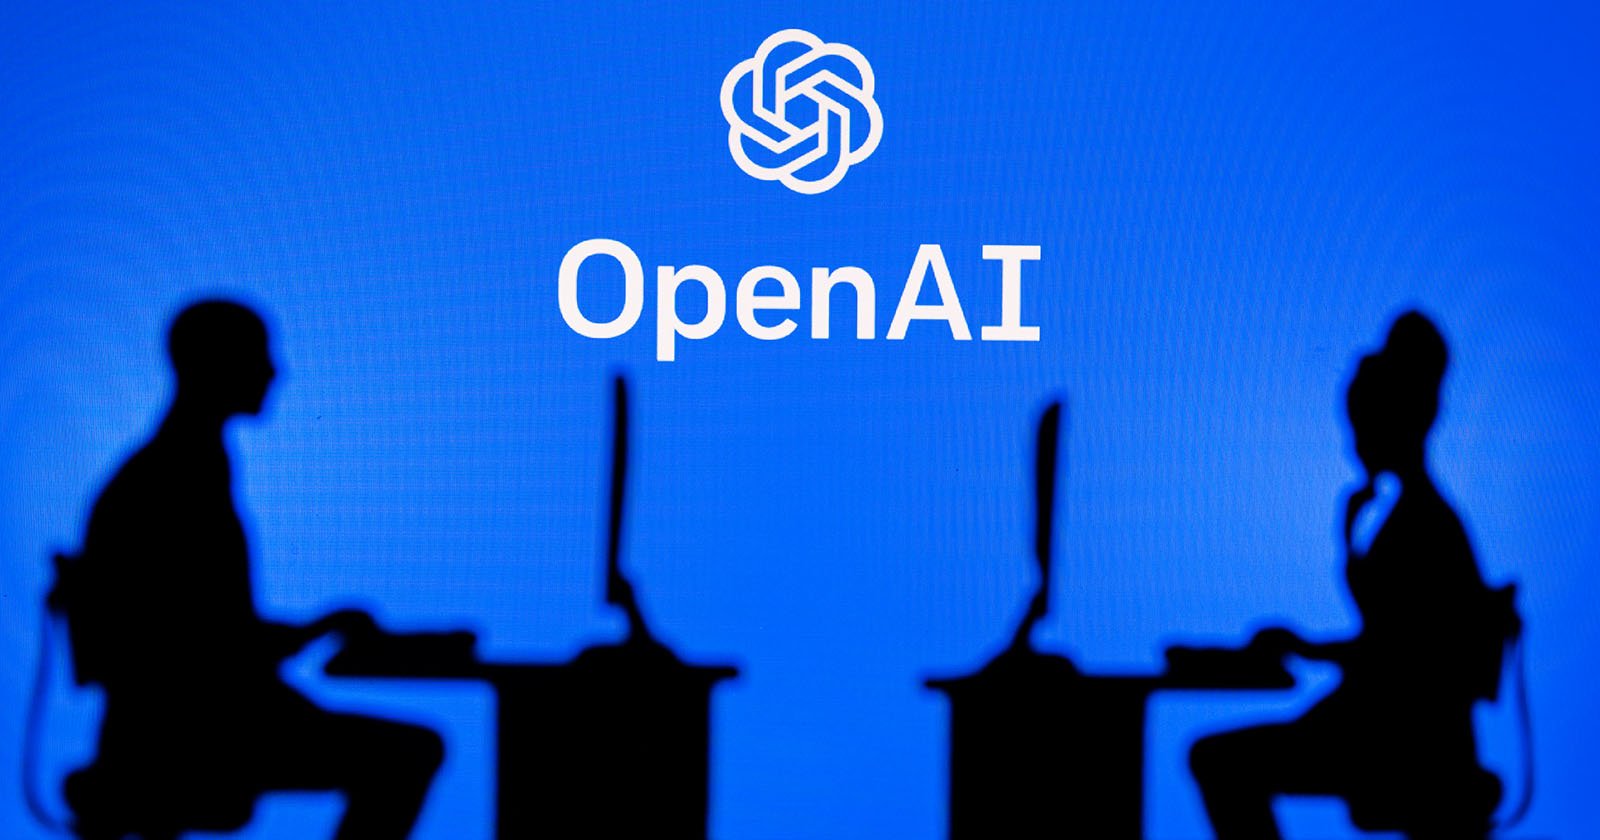 OpenAI Claims it is Impossible to Train AI Without Using Copyrighted Content